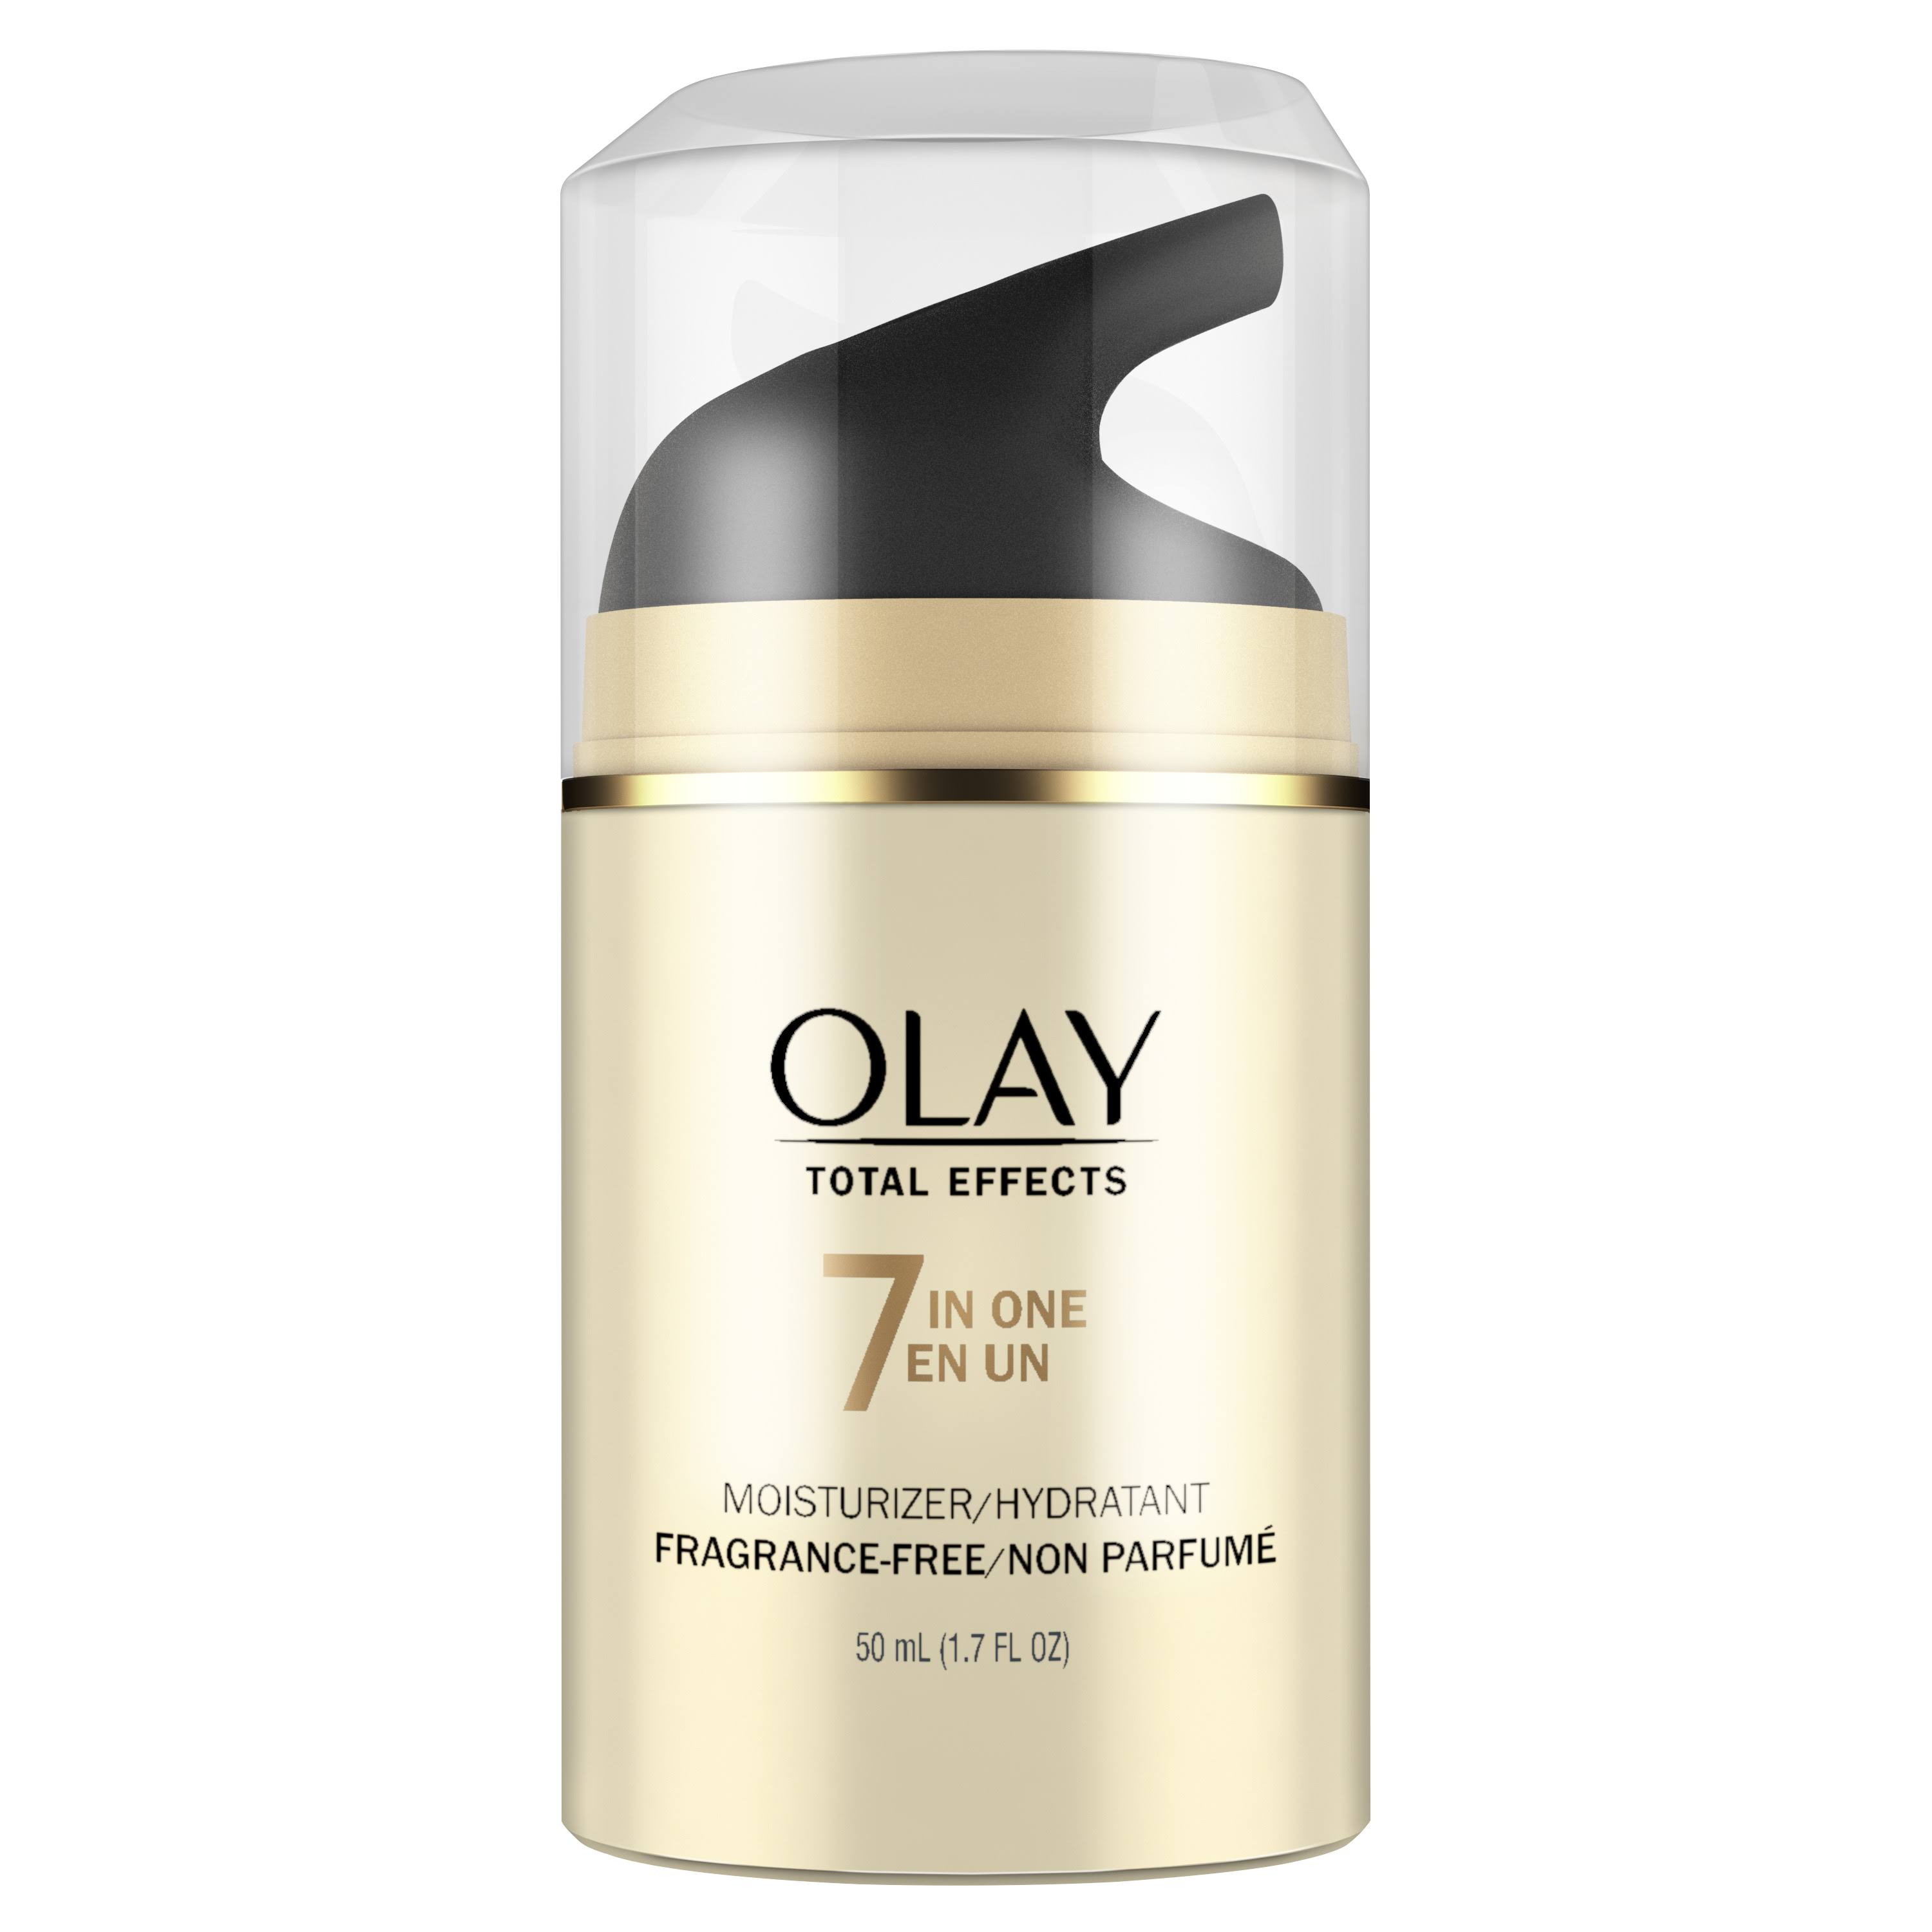 Olay Total Effects Anti-Aging Face Moisturizer - 50ml